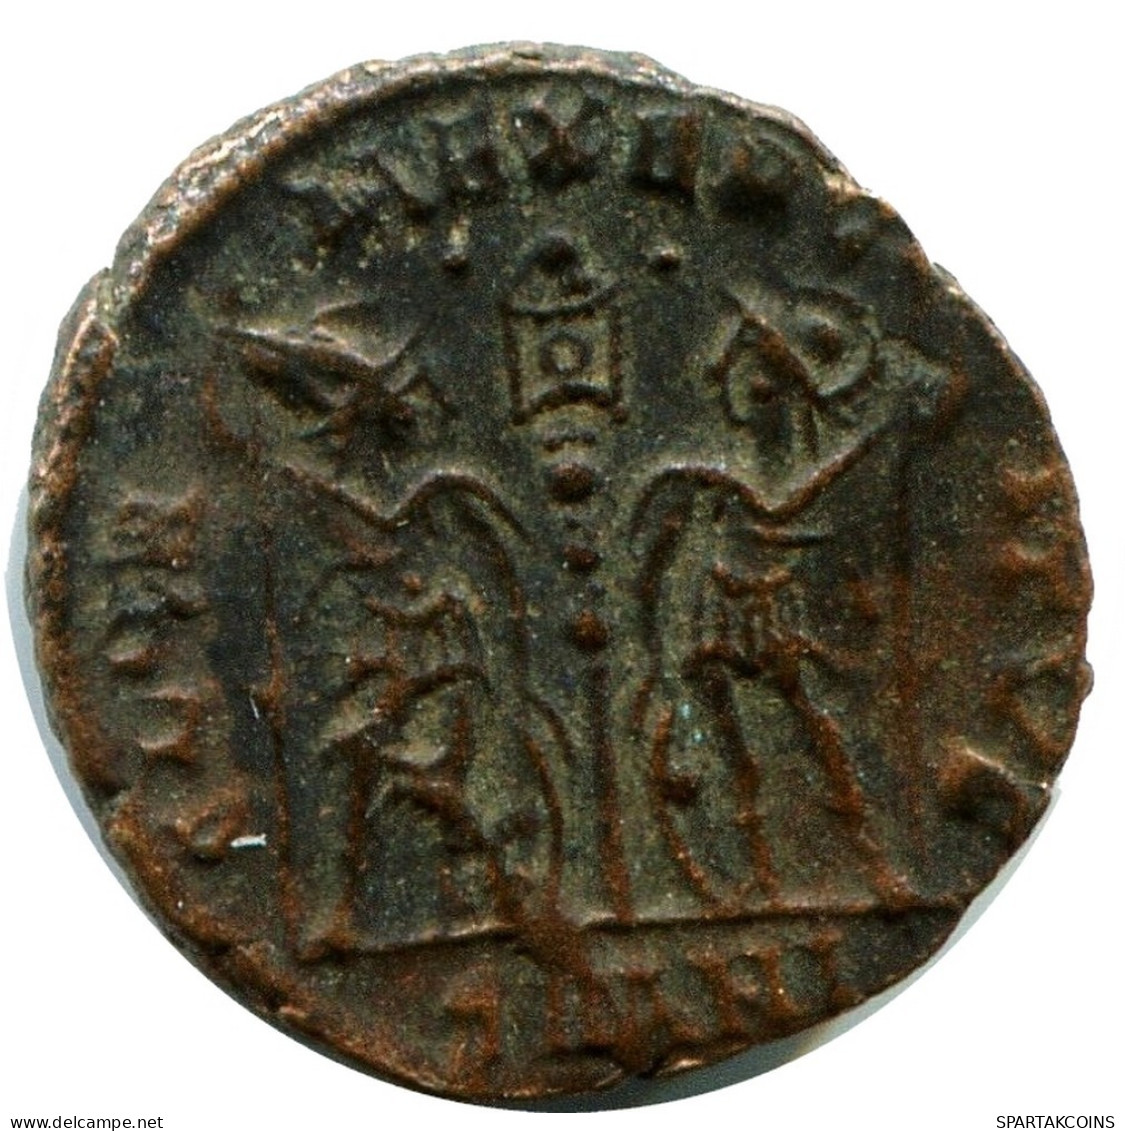 CONSTANS MINTED IN ANTIOCH FROM THE ROYAL ONTARIO MUSEUM #ANC11840.14.D.A - El Impero Christiano (307 / 363)